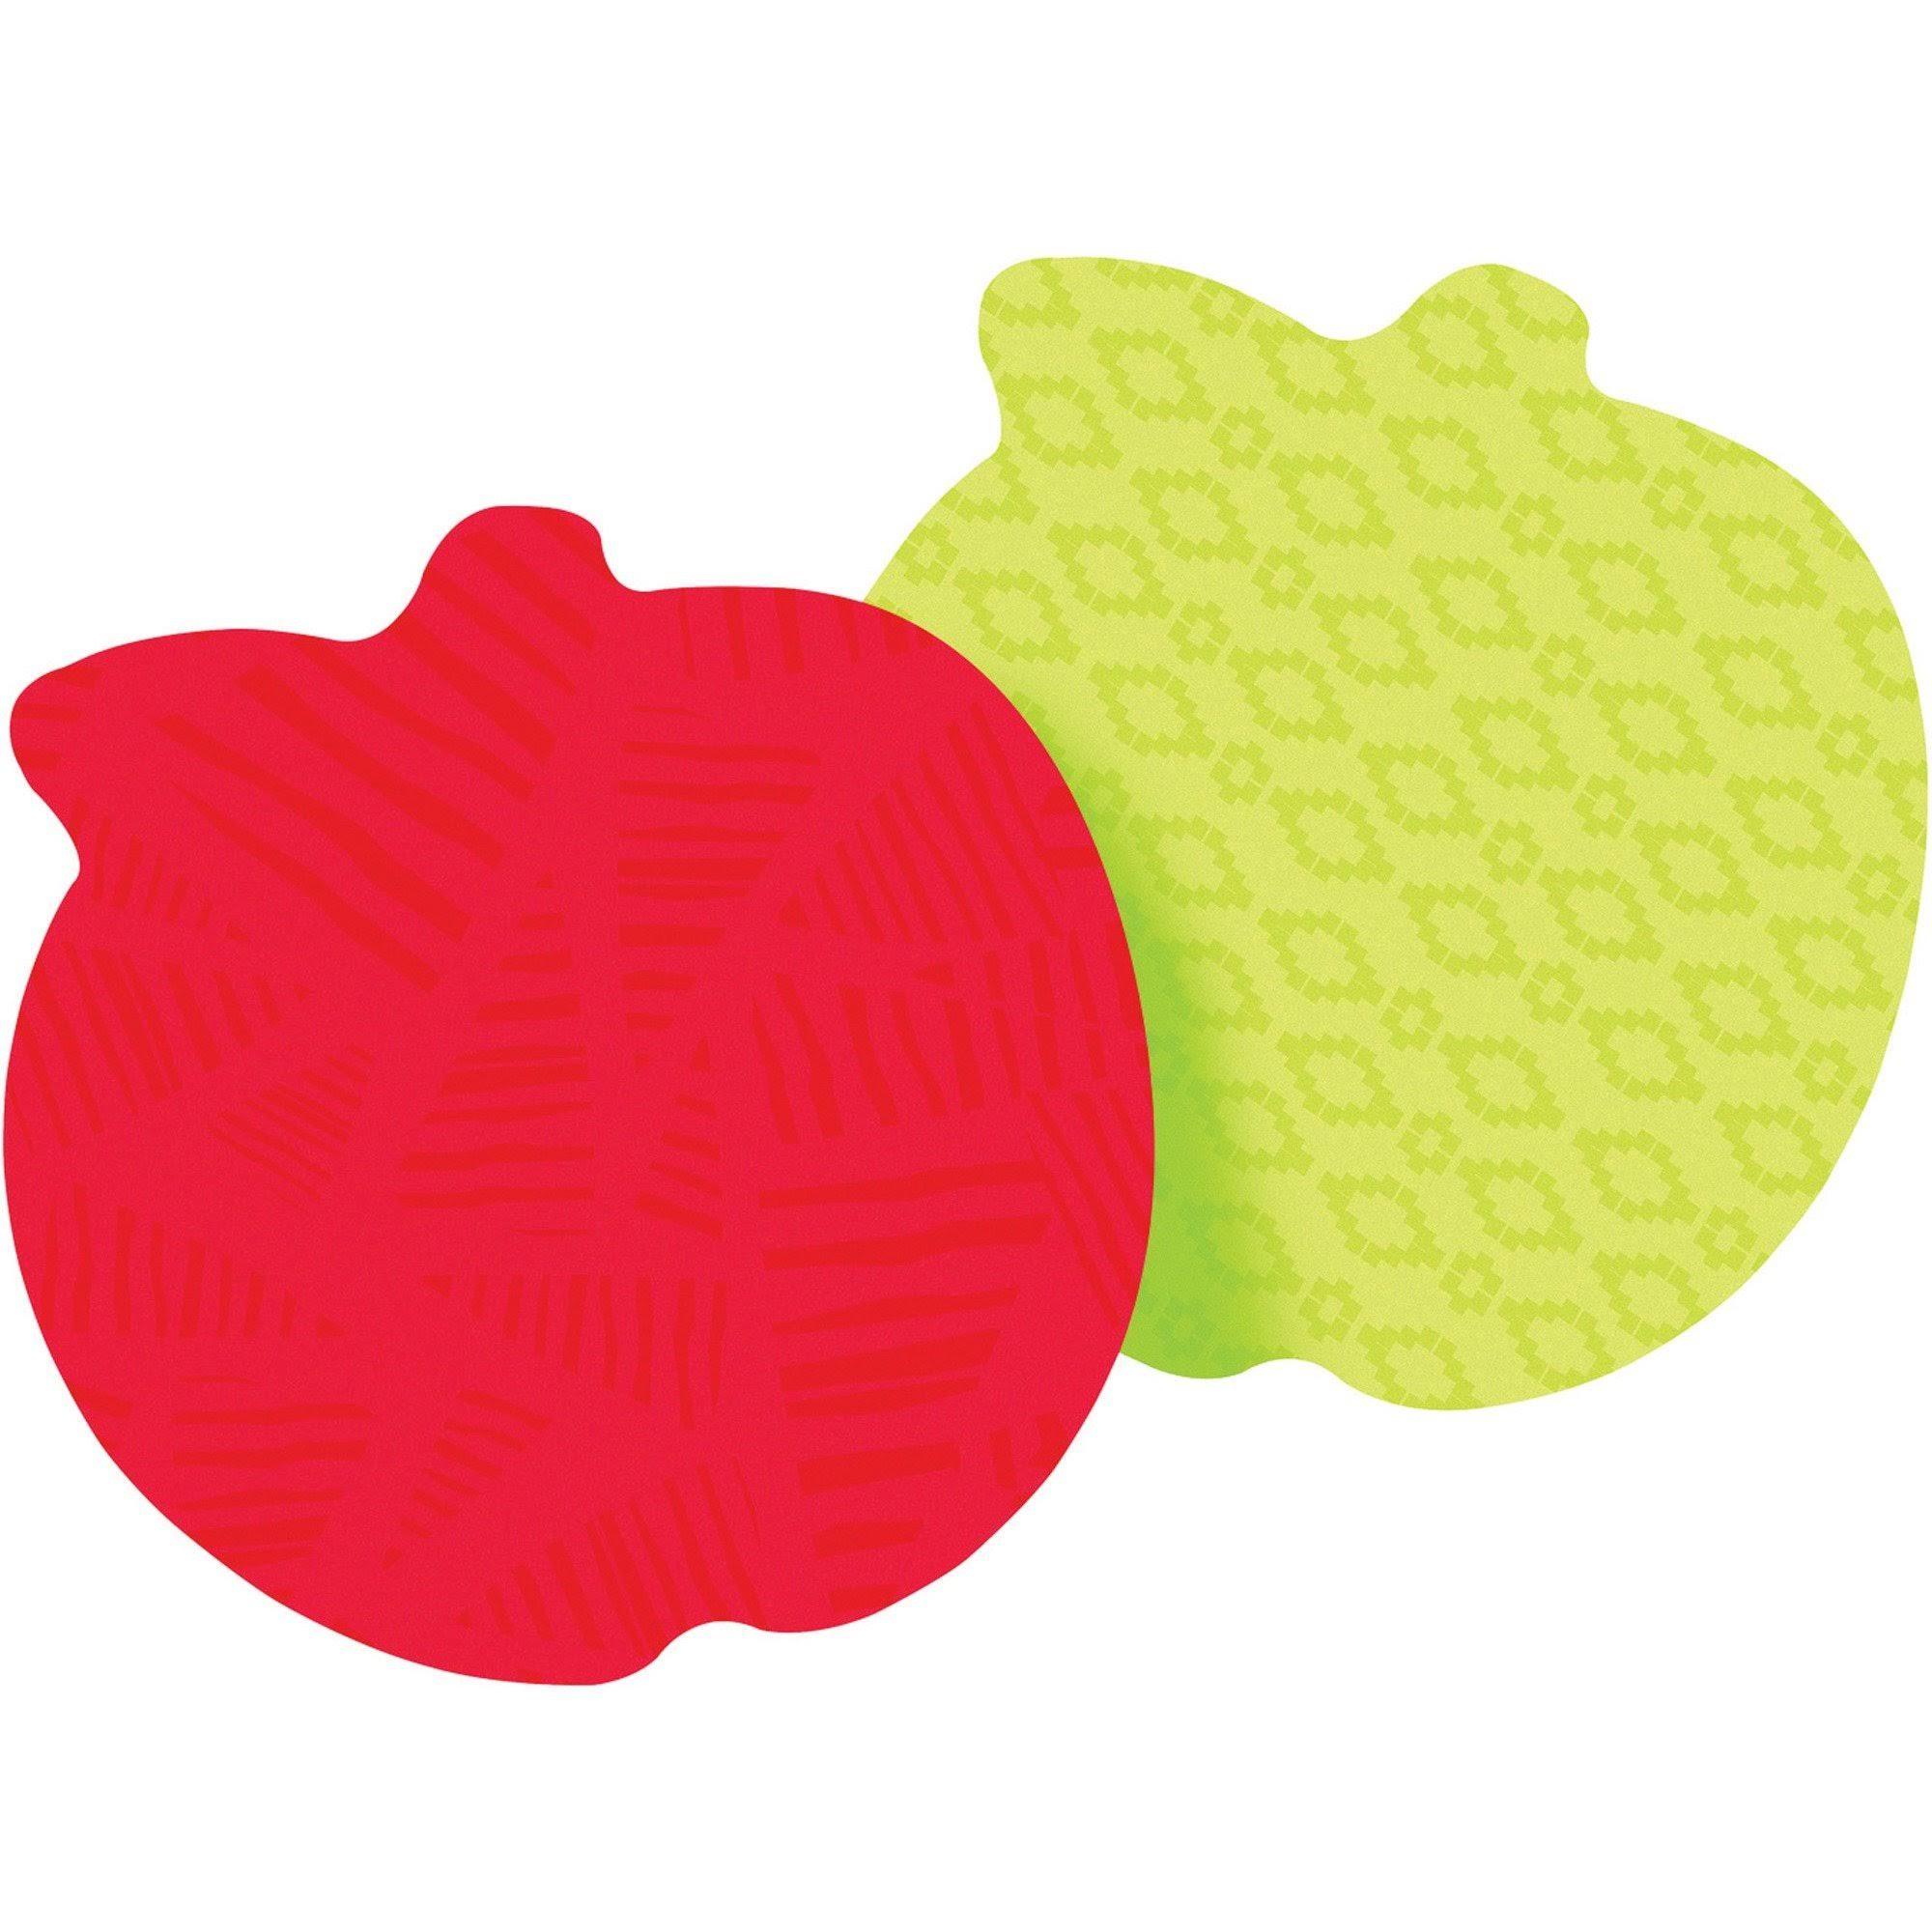 Post It 3" X 3" Apple Shape Assorted Colors Notes